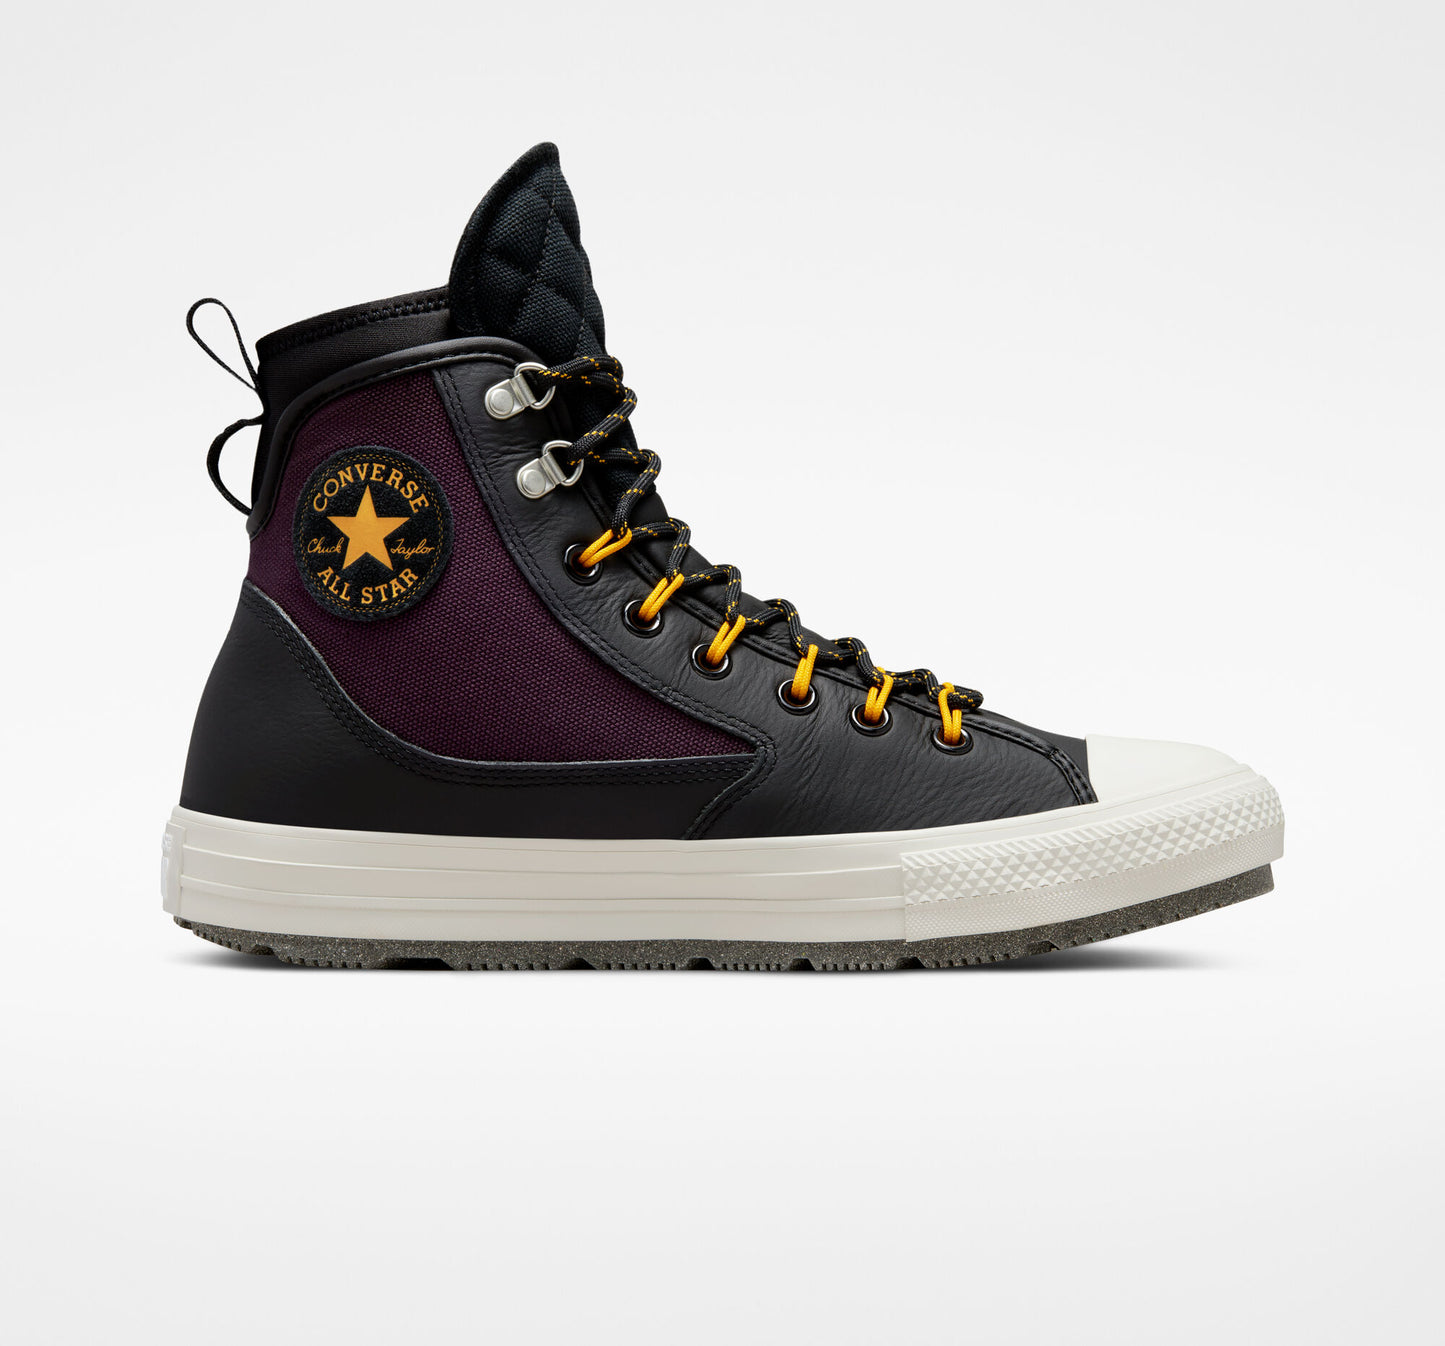 Converse Chuck Taylor All Star All Terrain Counter Climate WP Boot, A01381C Multi Sizes Black/Black Cherry